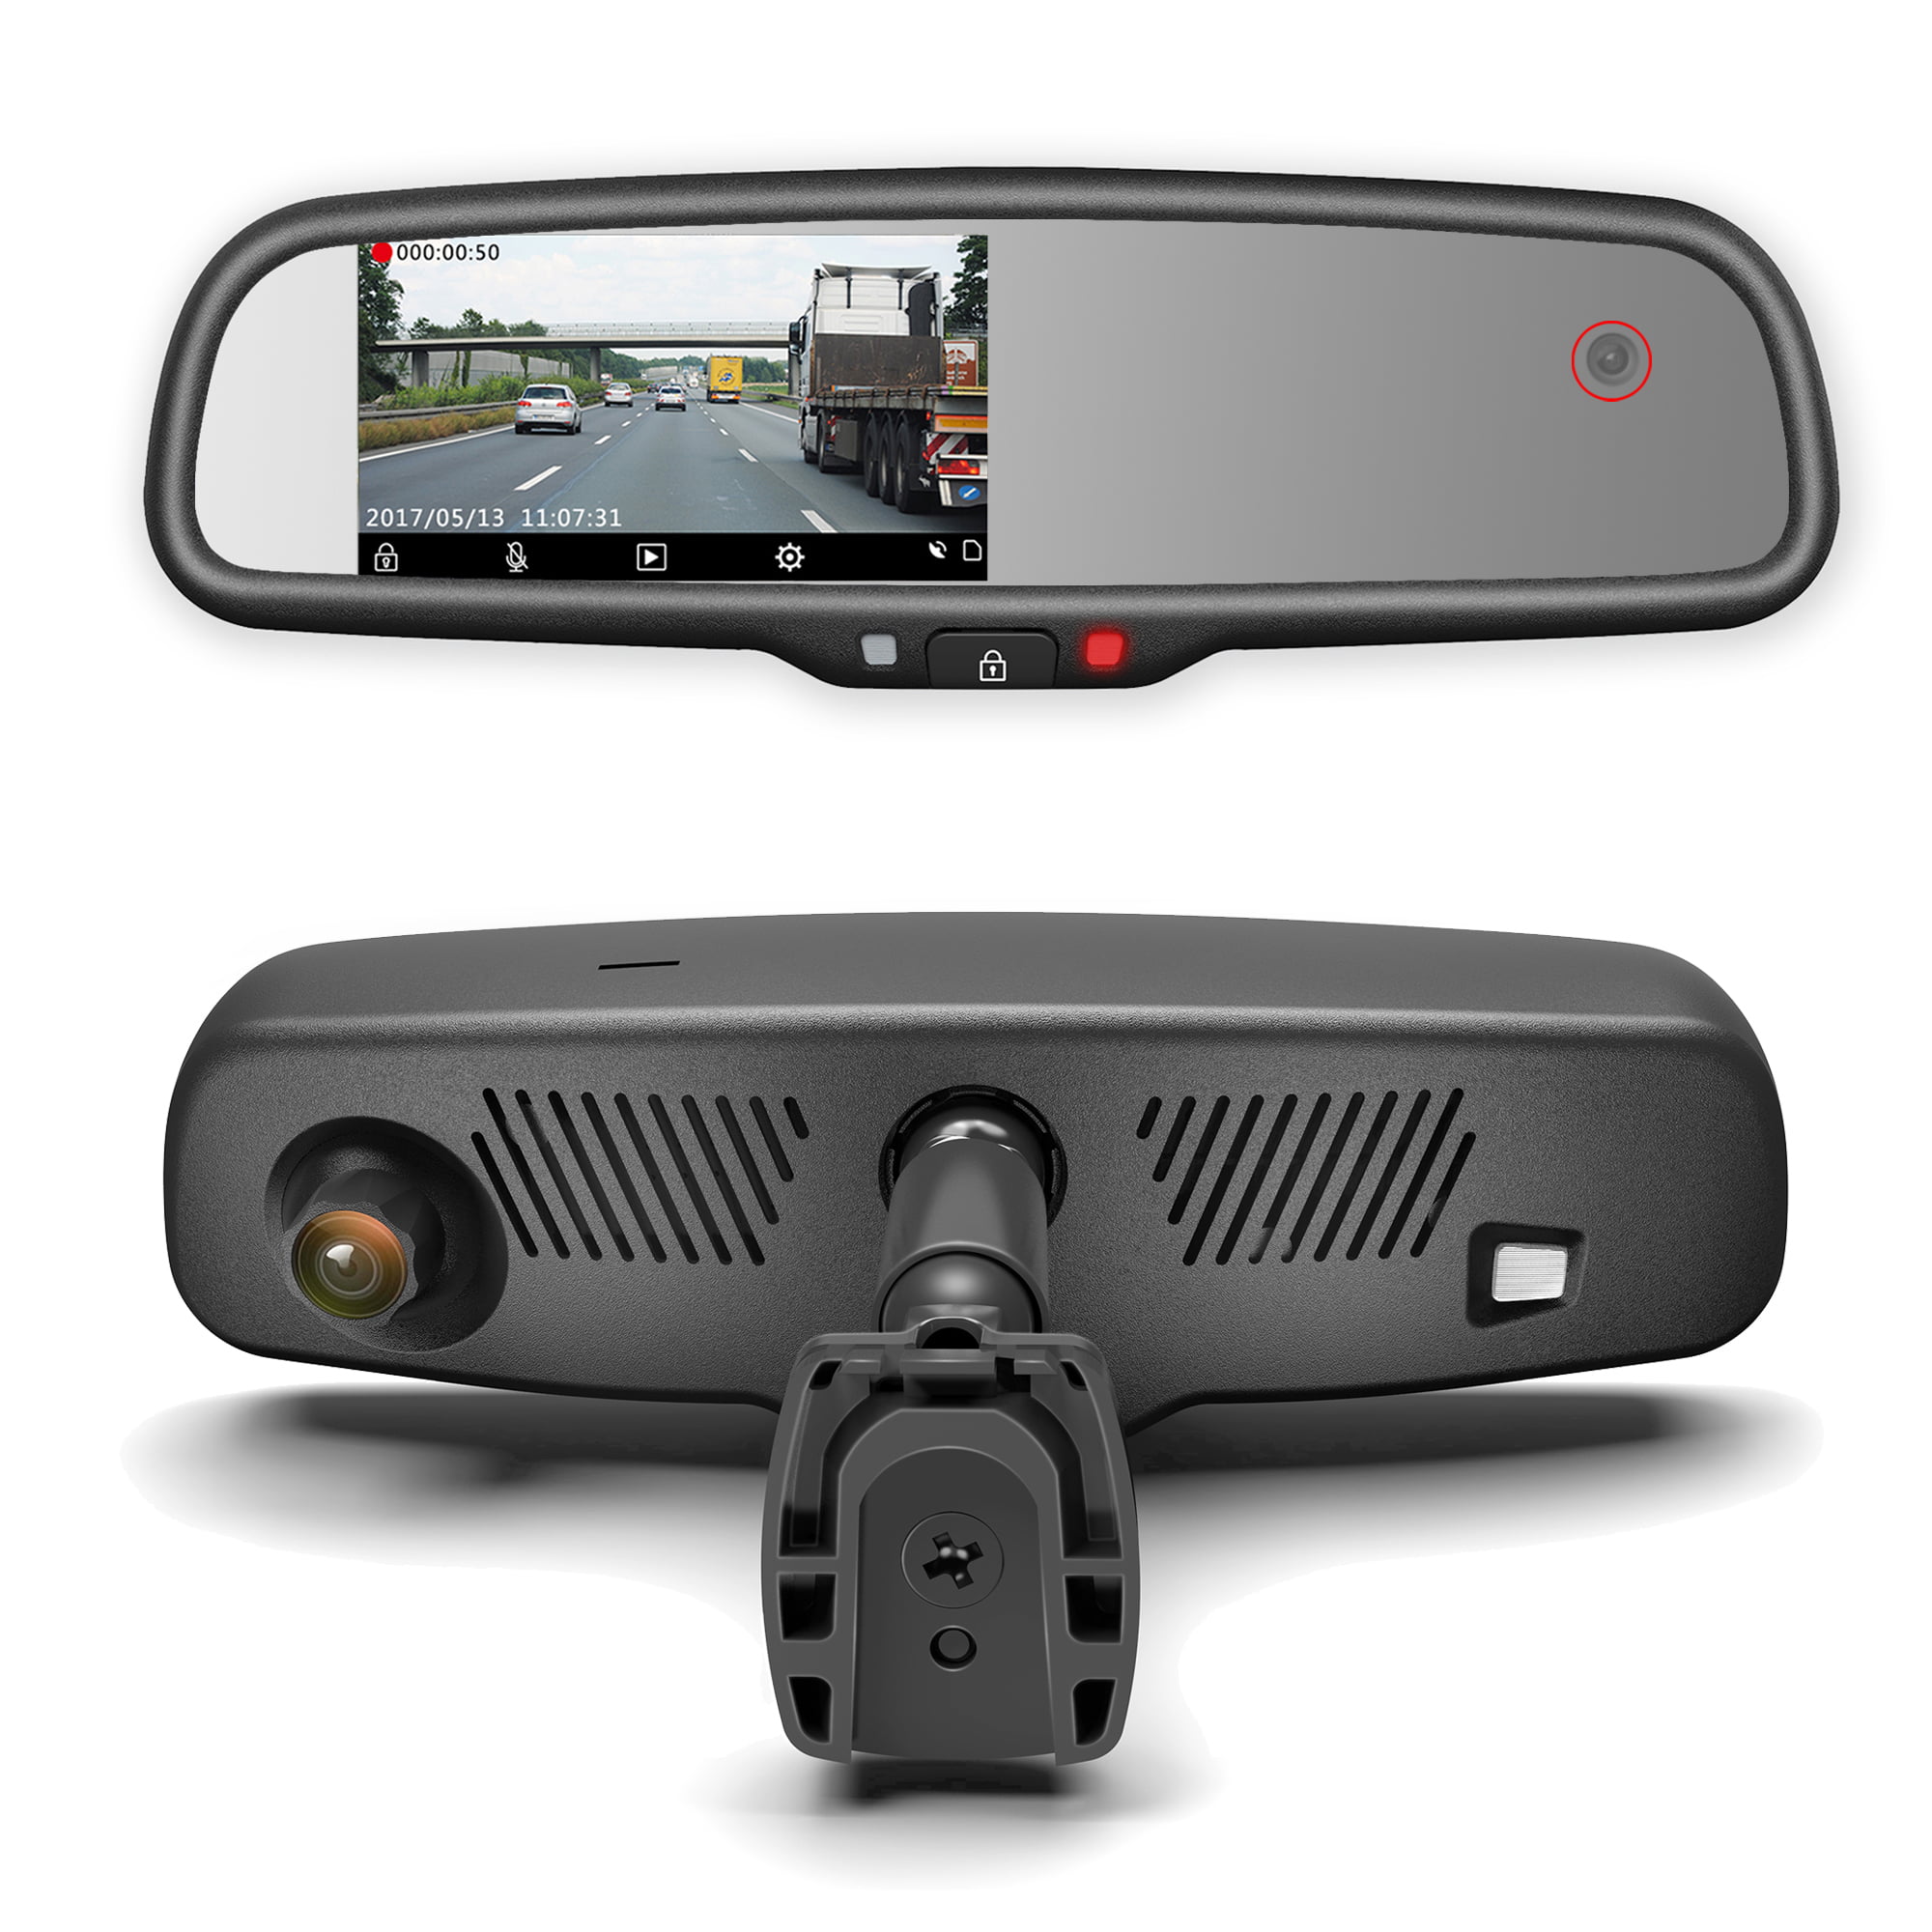 Wi-Fi Mobile Playback 1080p Backup Camera Superior Night Mode G-Sensor Master Tailgaters 10” IPS LCD Rear View Mirror with 1080p DVR 140° Built-in Dash Cam Parking Mode